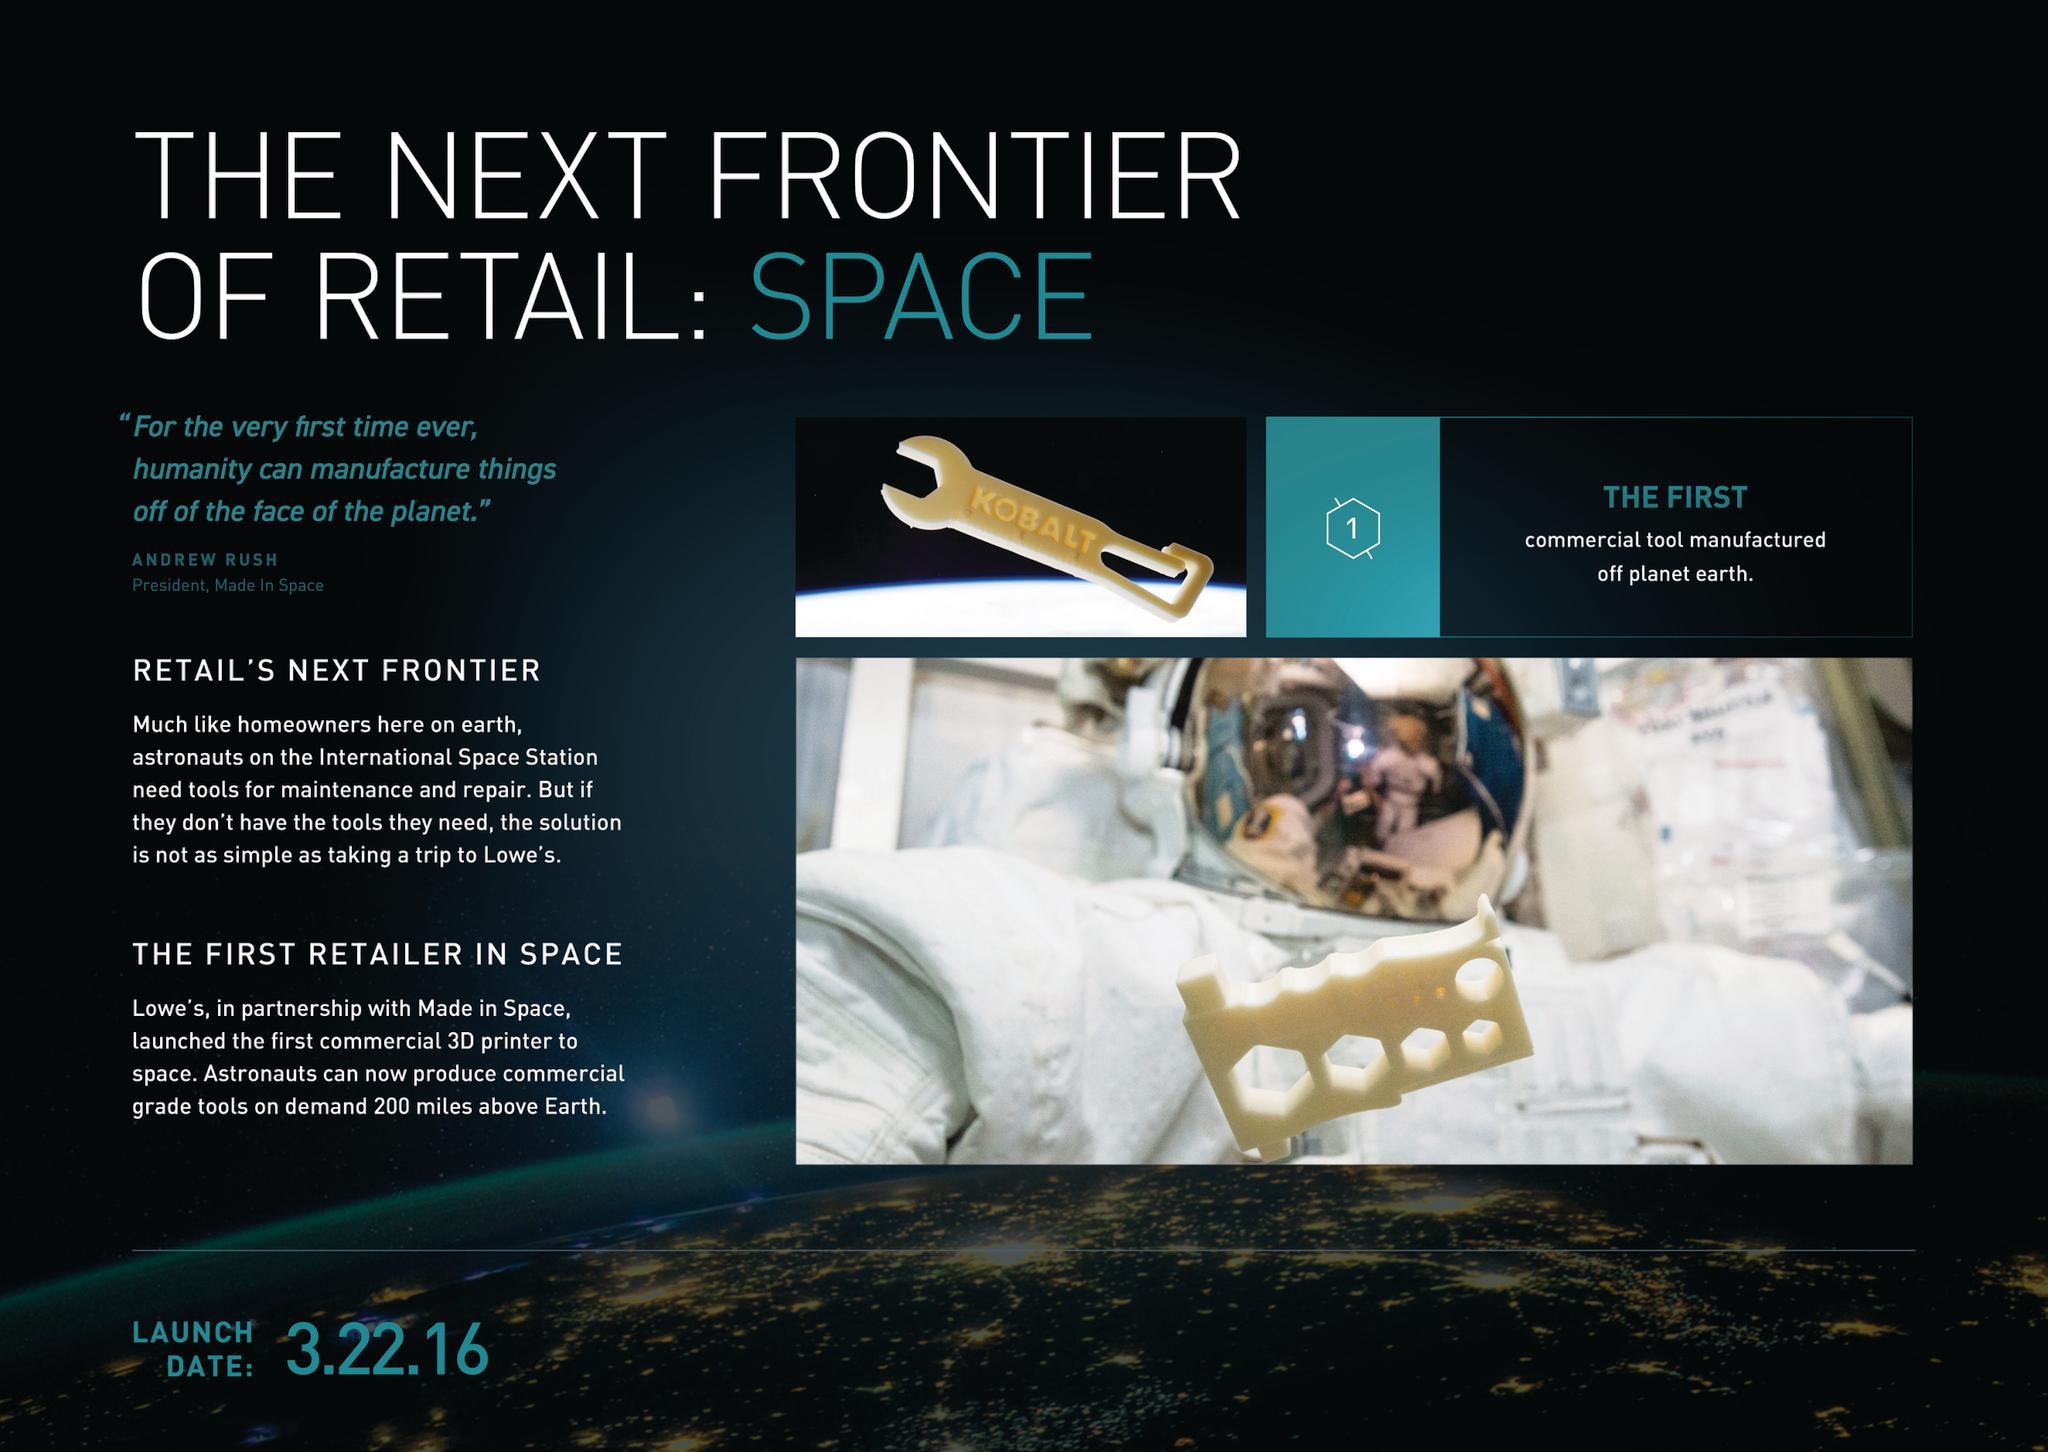 First commercial 3D printer in space